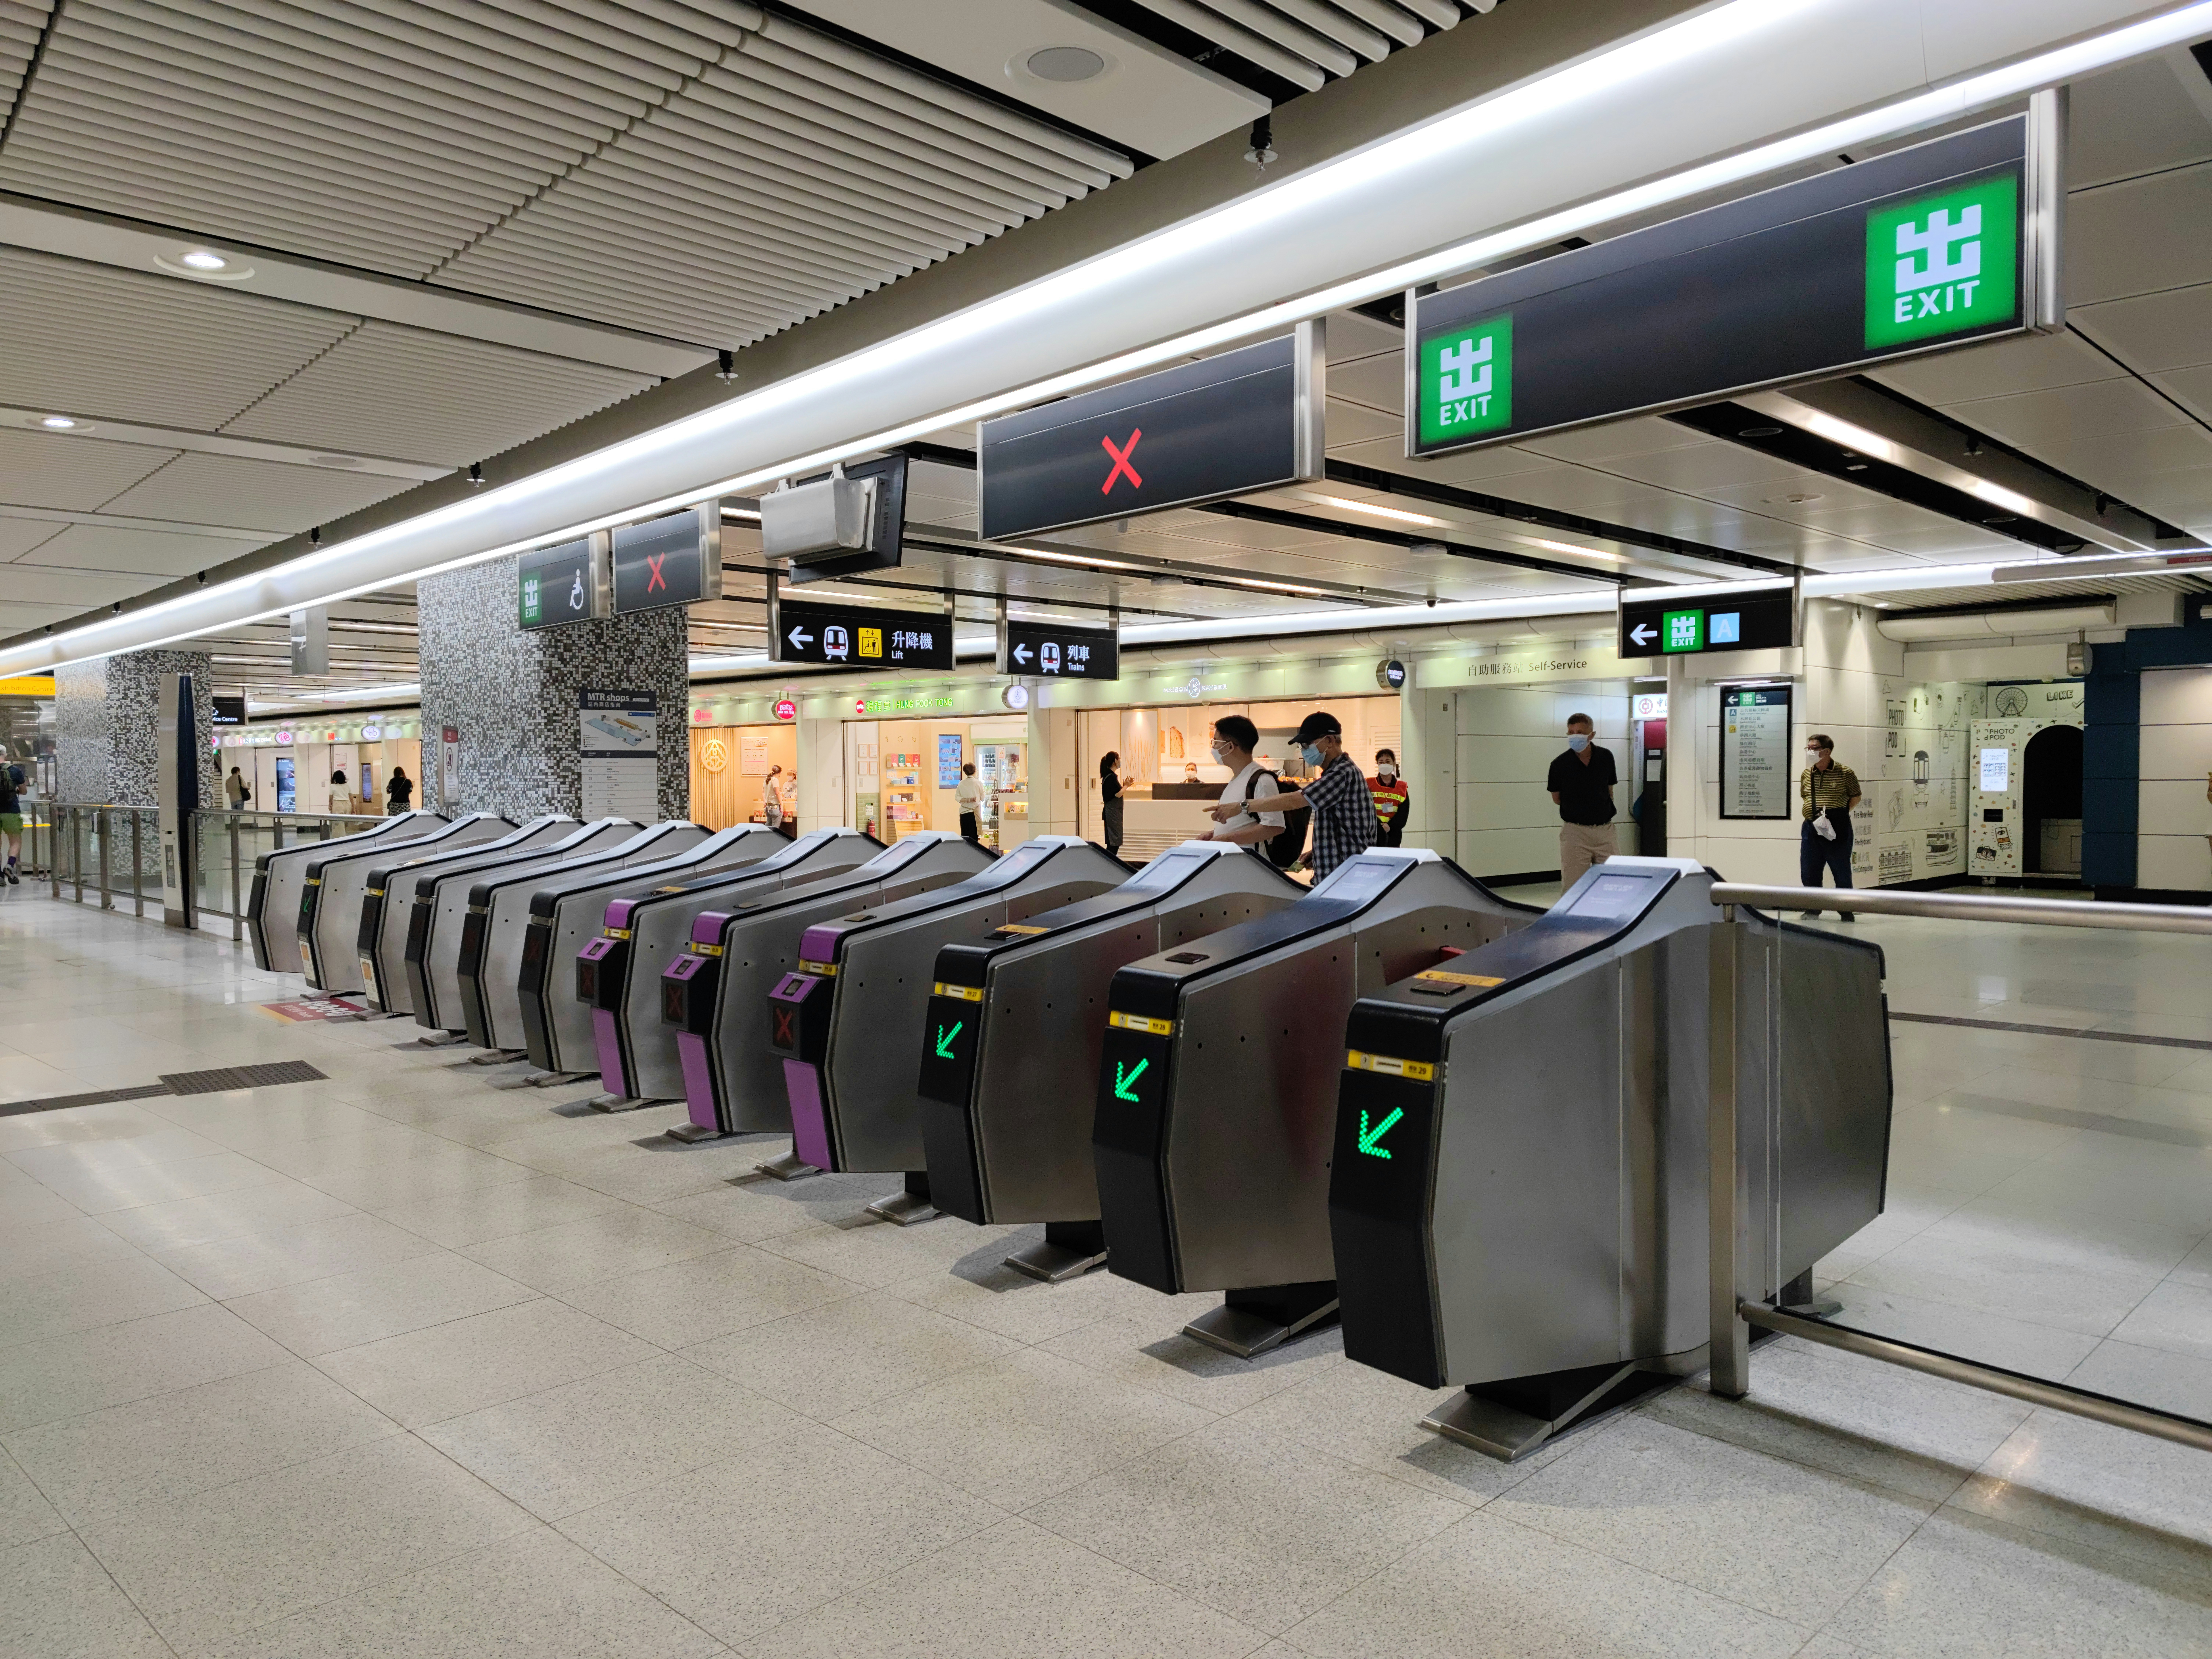 Gates at the newly opened Exhibition Centre Station of the Hong Kong MTR( Mass Transit Railway) in Wanchai, Hong Kong Island. Exhibition Centre Station is a newly opened MTR station of the new line called Shatin to Central Link of the historical East Rail Line in Hong Kong.